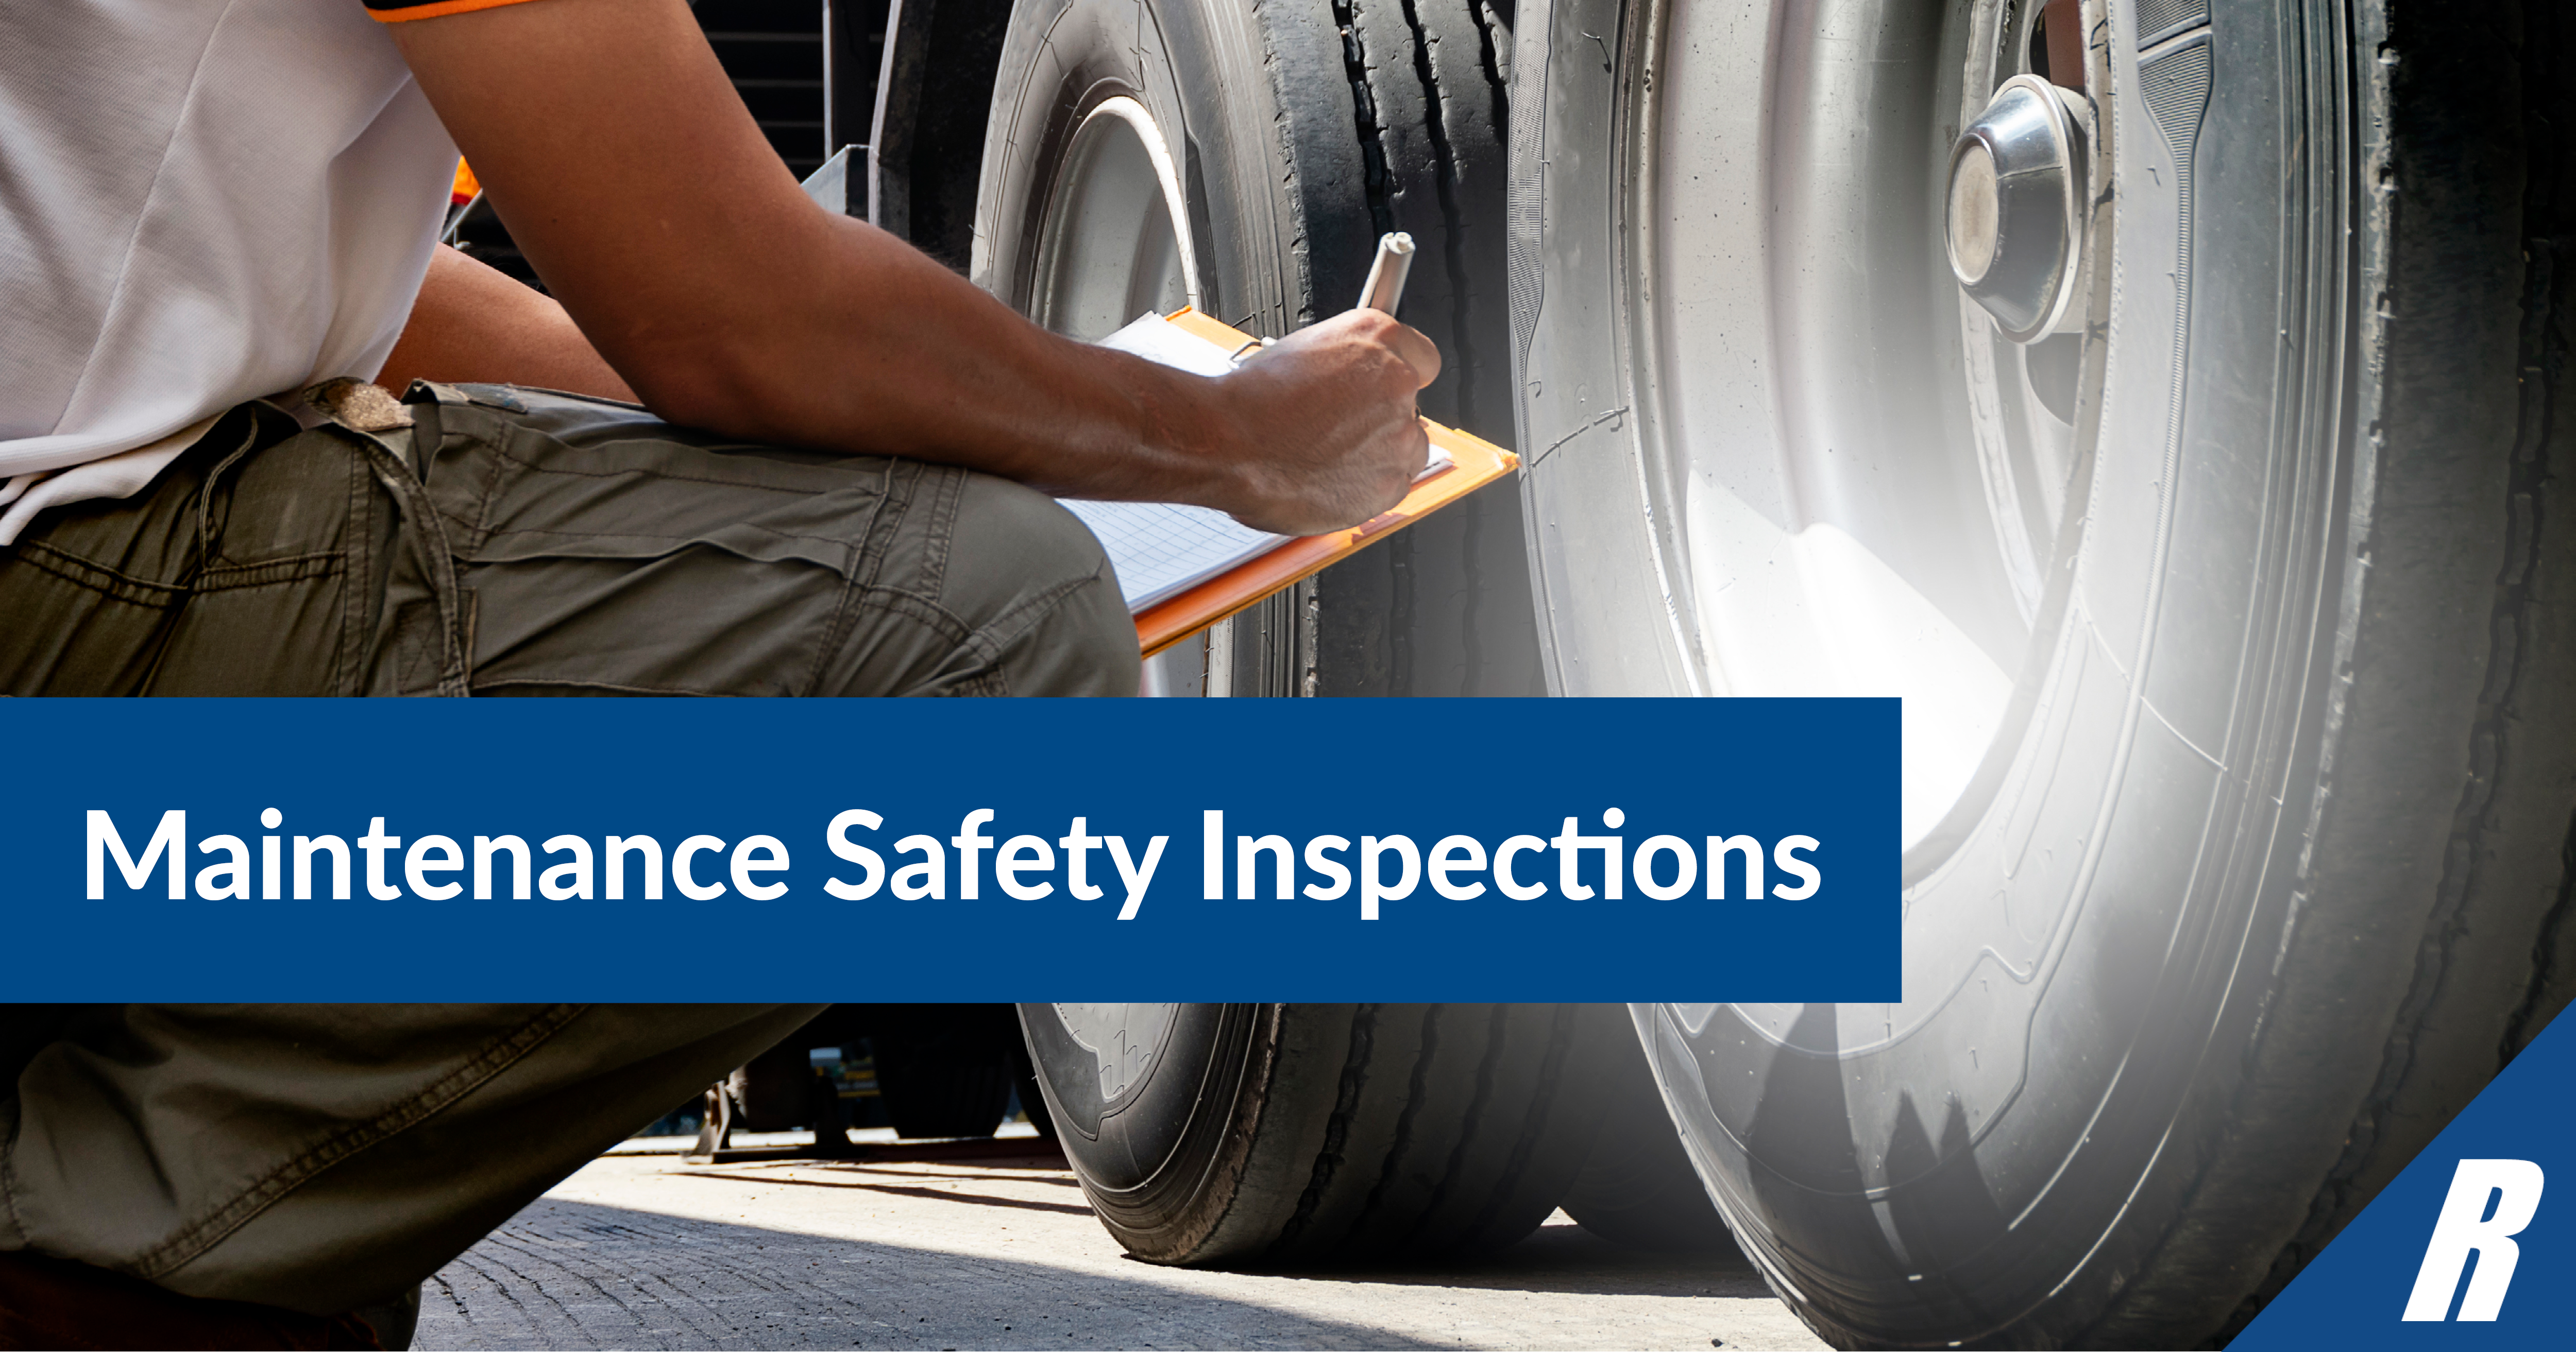 Maintenance Safety Inspections Social